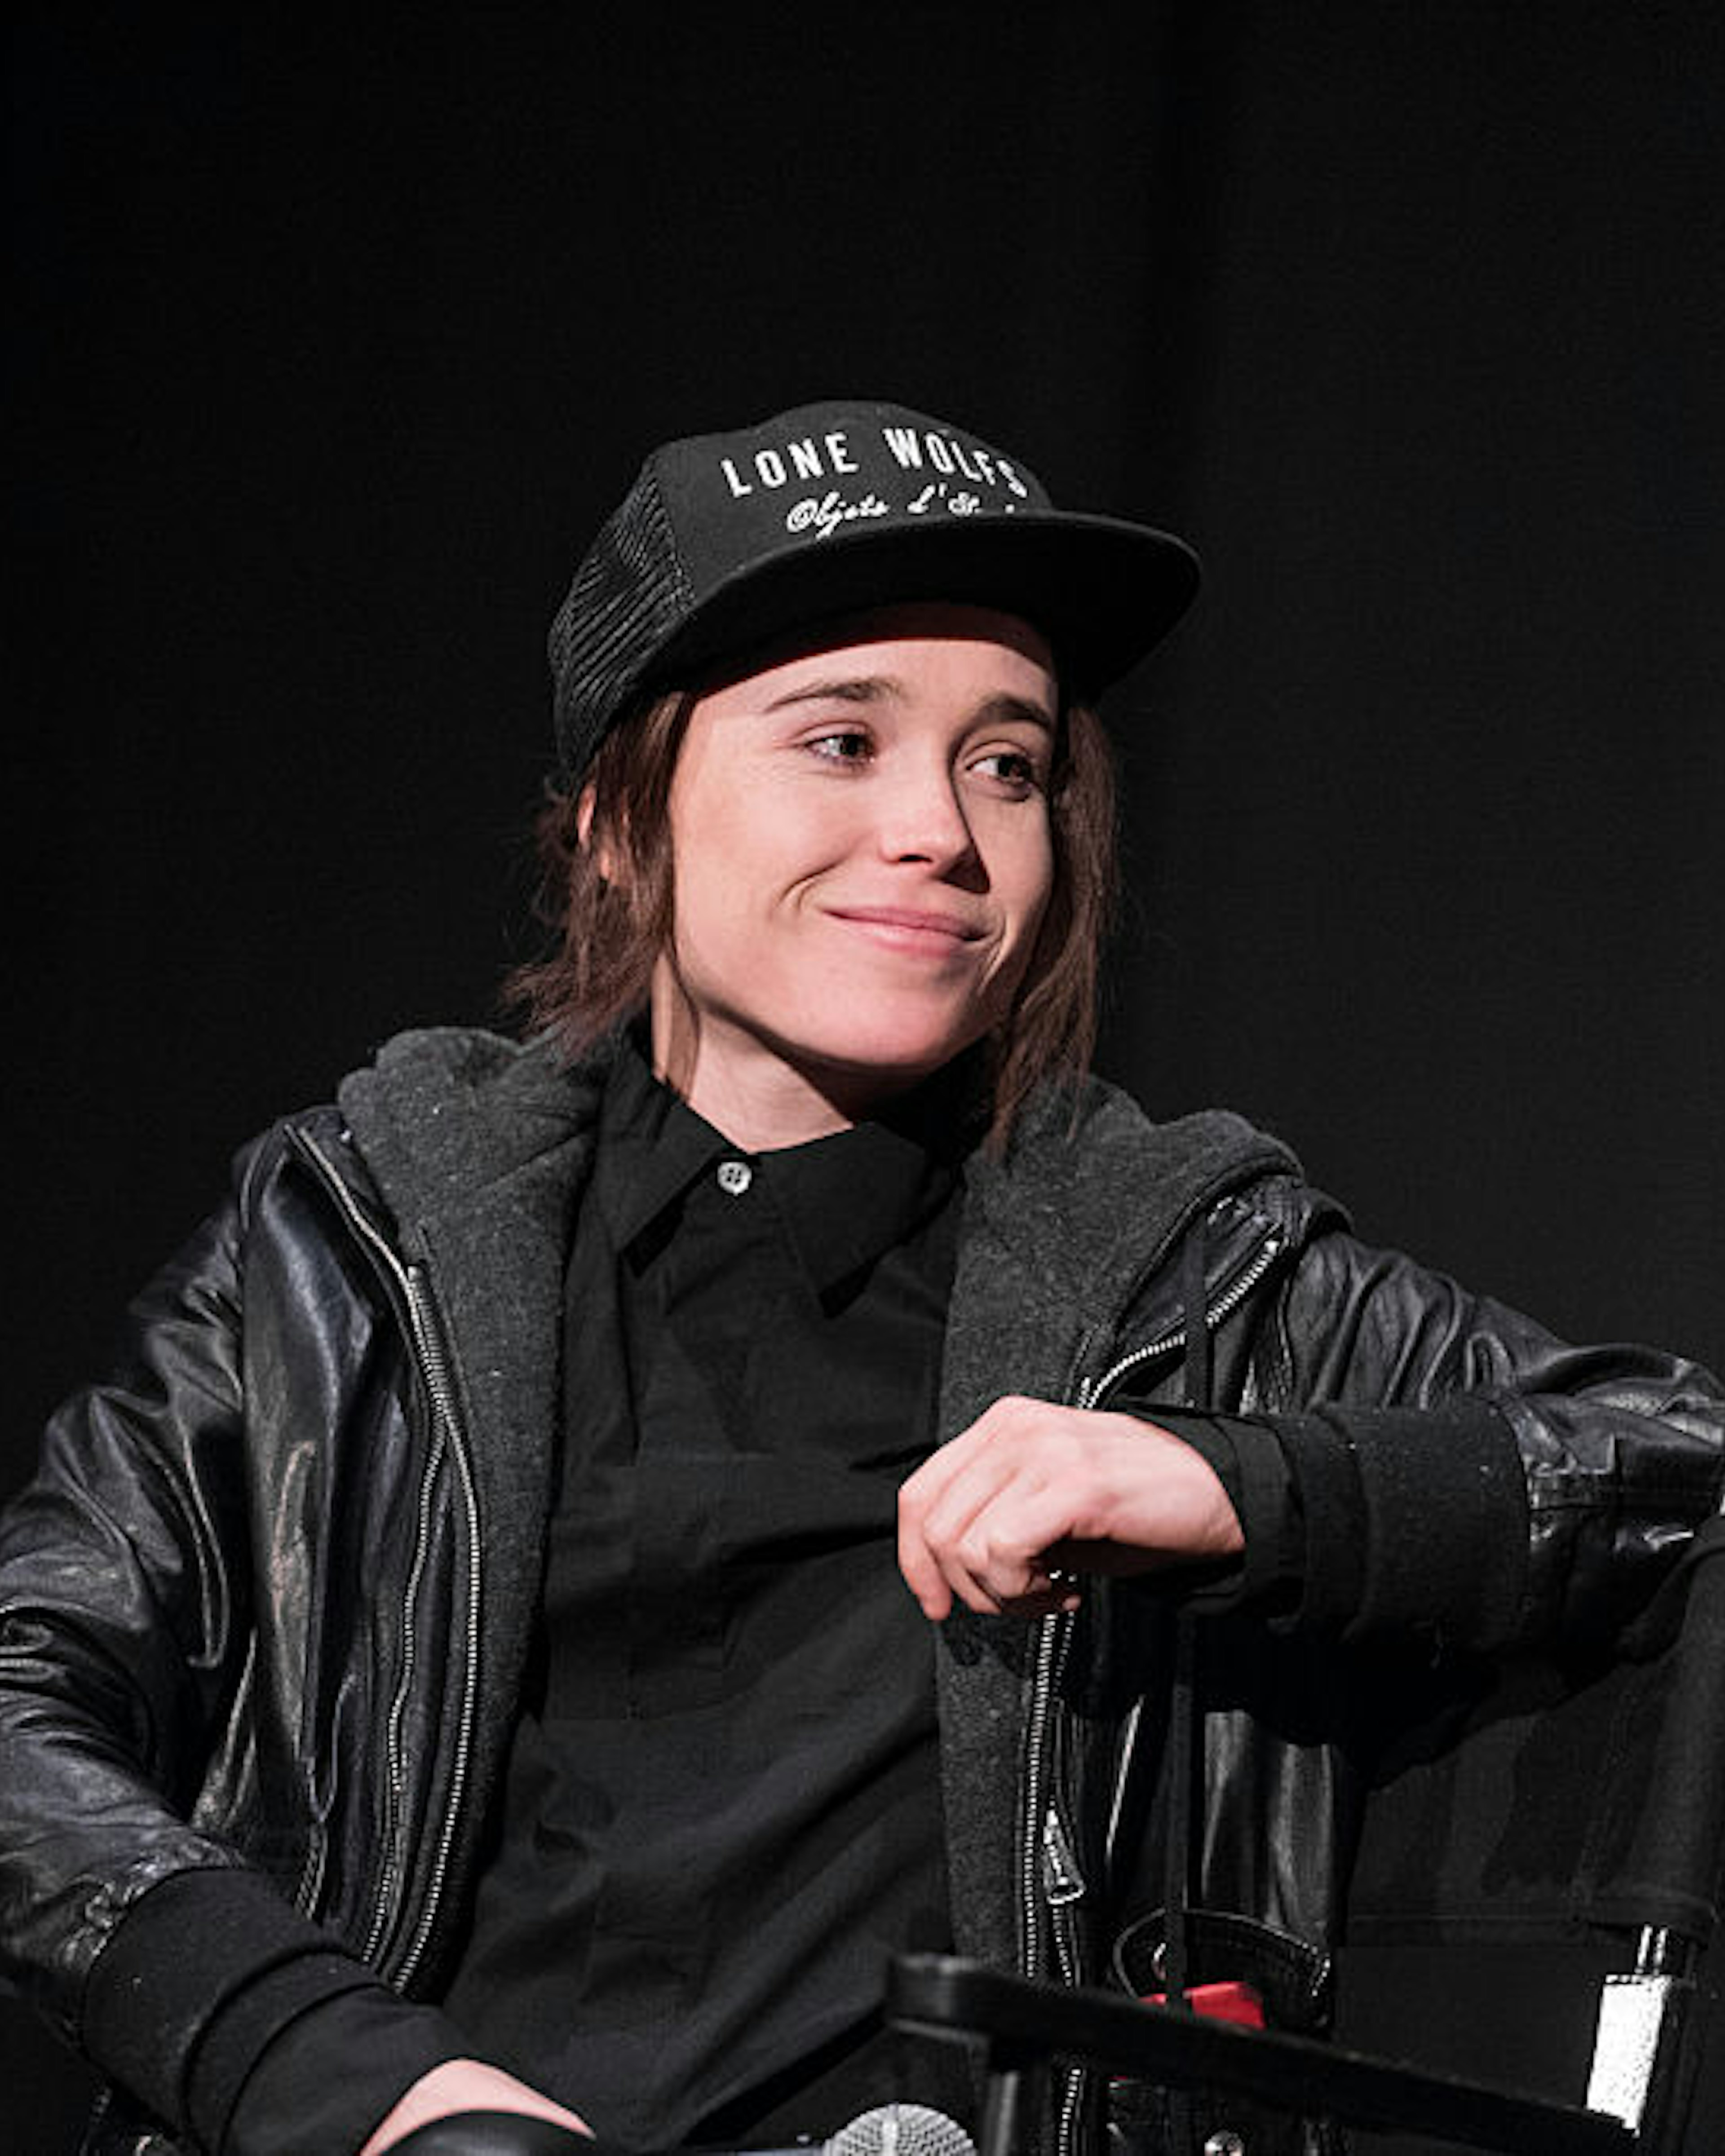 HOLLYWOOD, CA - DECEMBER 05: Ellen Page speaks onstage during a Q&amp;A following the screening of "Janis: Little Girl Blue" at ArcLight Cinemas on December 5, 2015 in Hollywood, California. (Photo by Emma McIntyre/Getty Images)